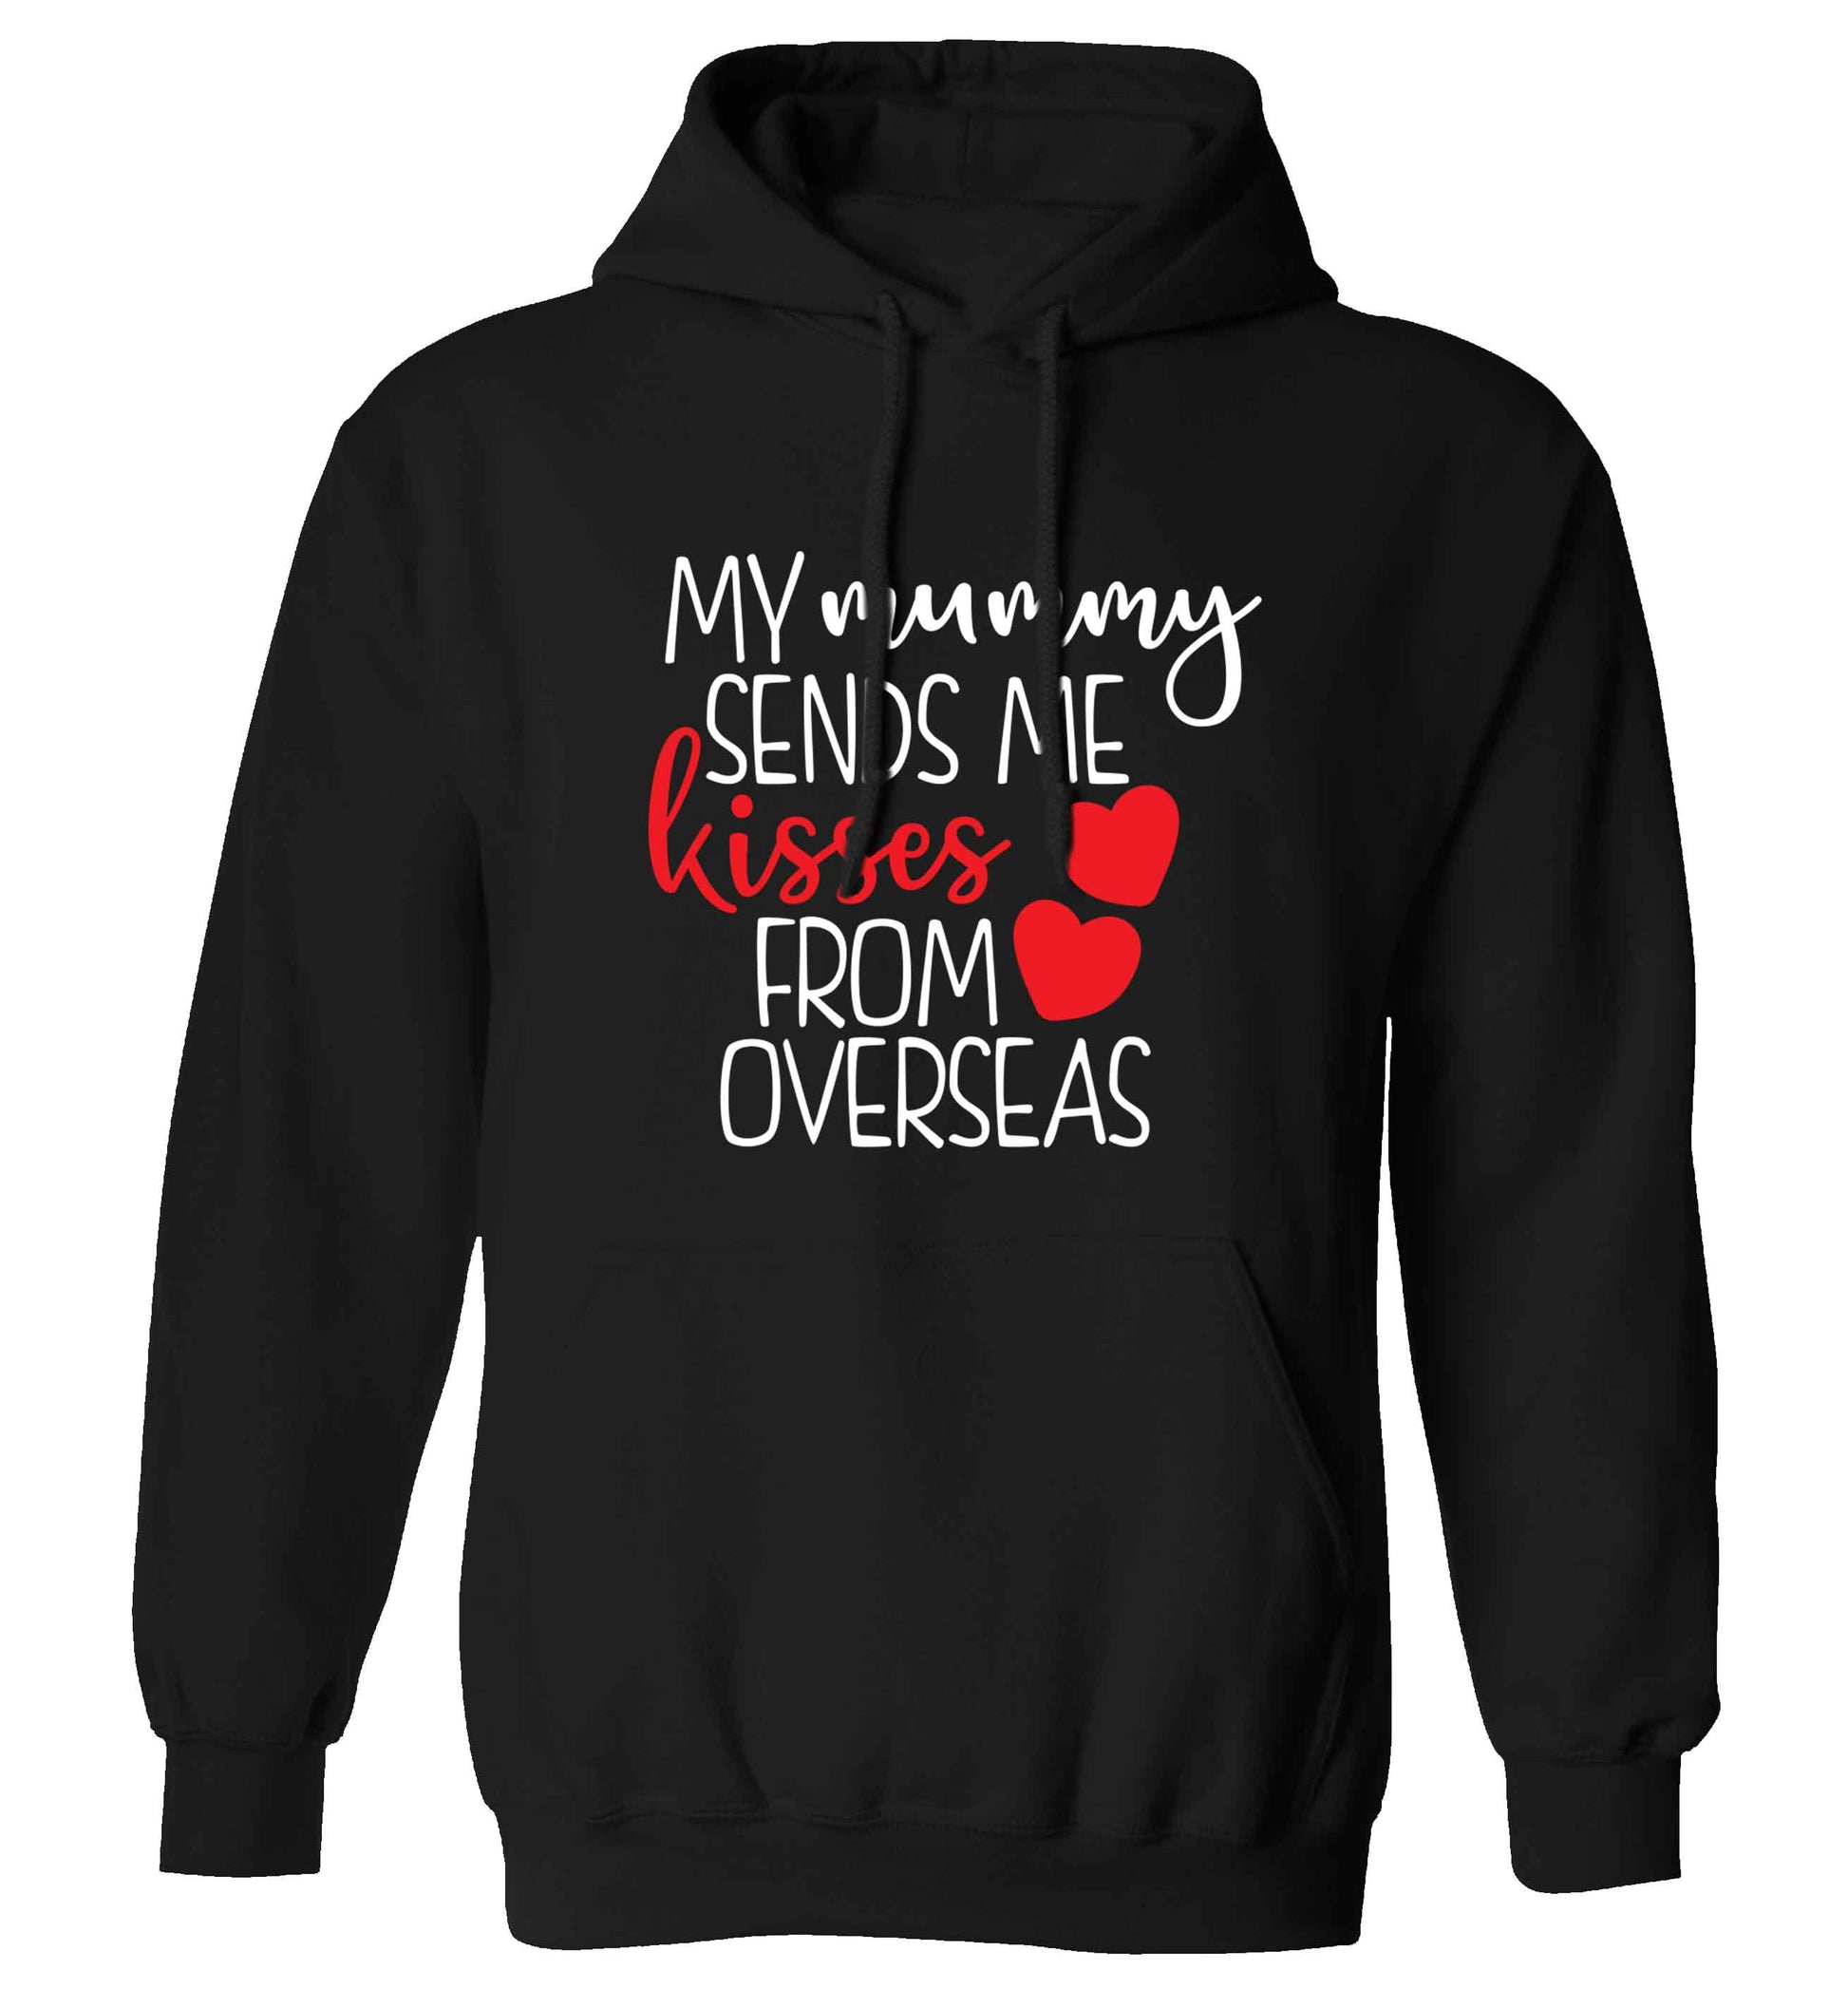 My mummy sends me kisses from overseas adults unisex black hoodie 2XL